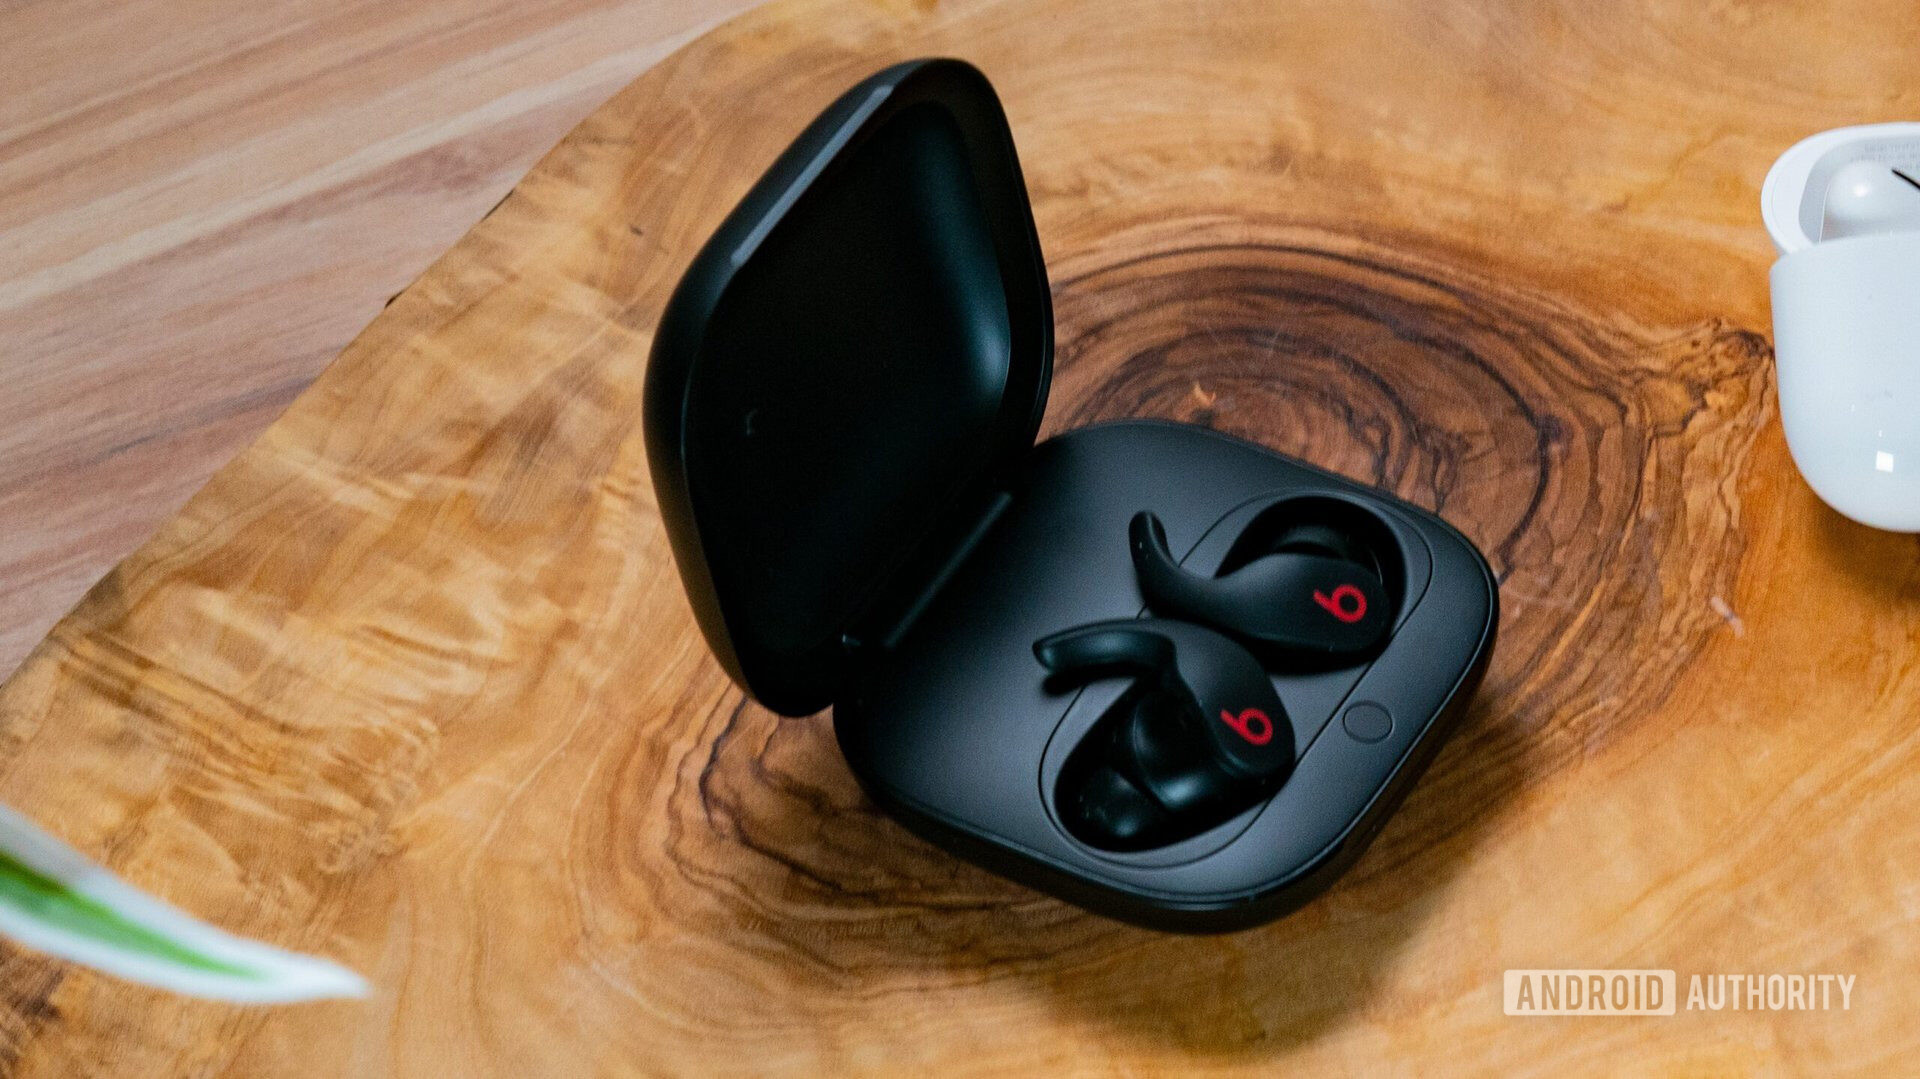 The black colorway of the Beats Fit Pro earbuds in the case.